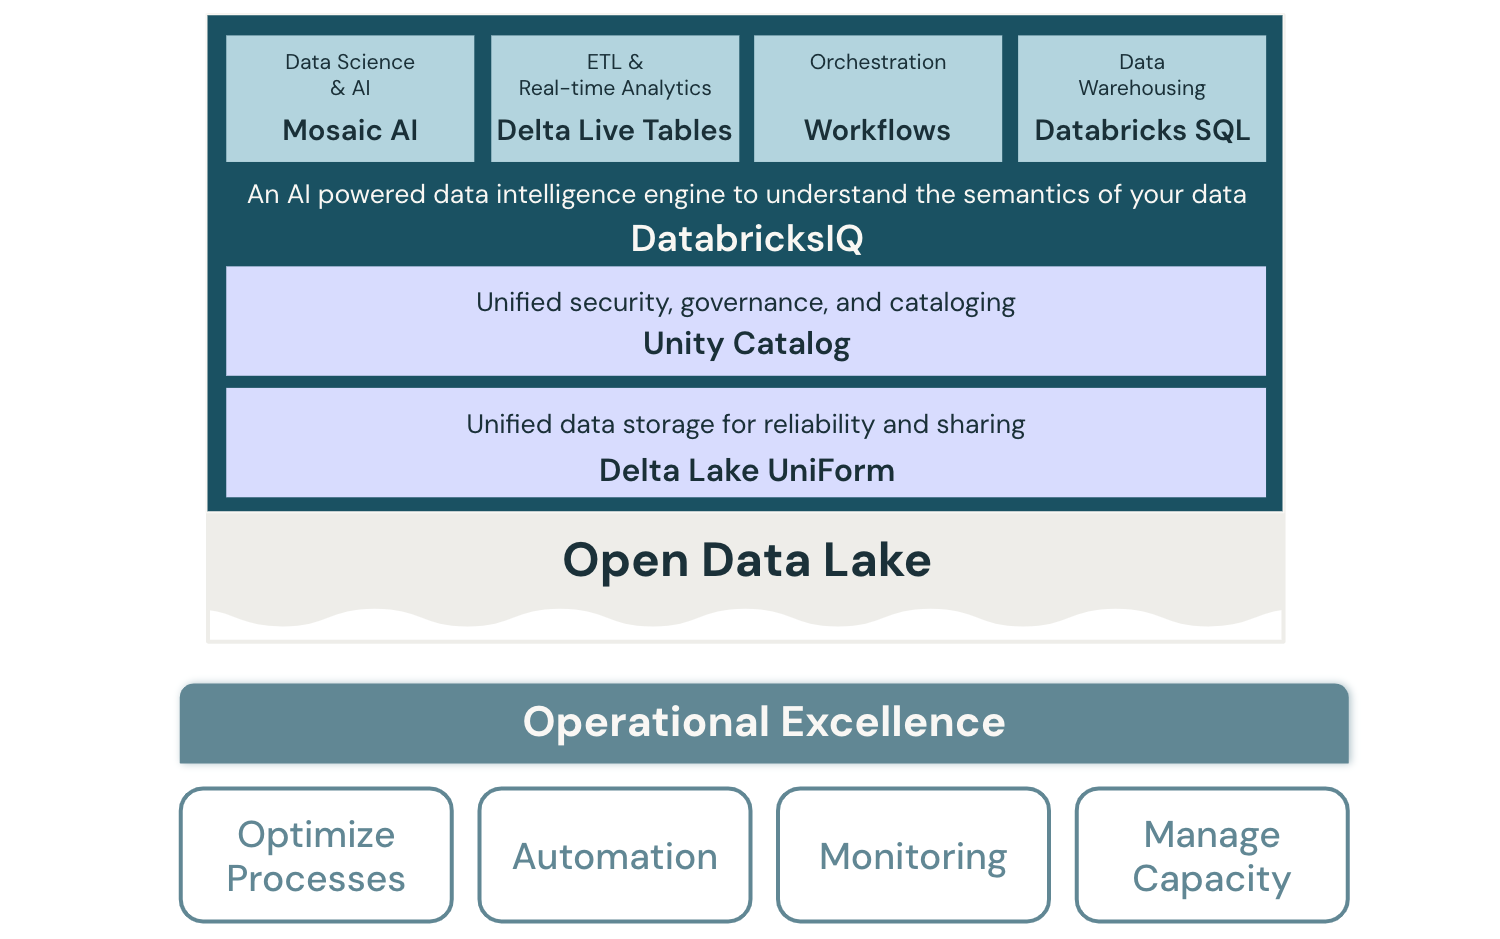 Operational excellence lakehouse architecture diagram for Databricks.